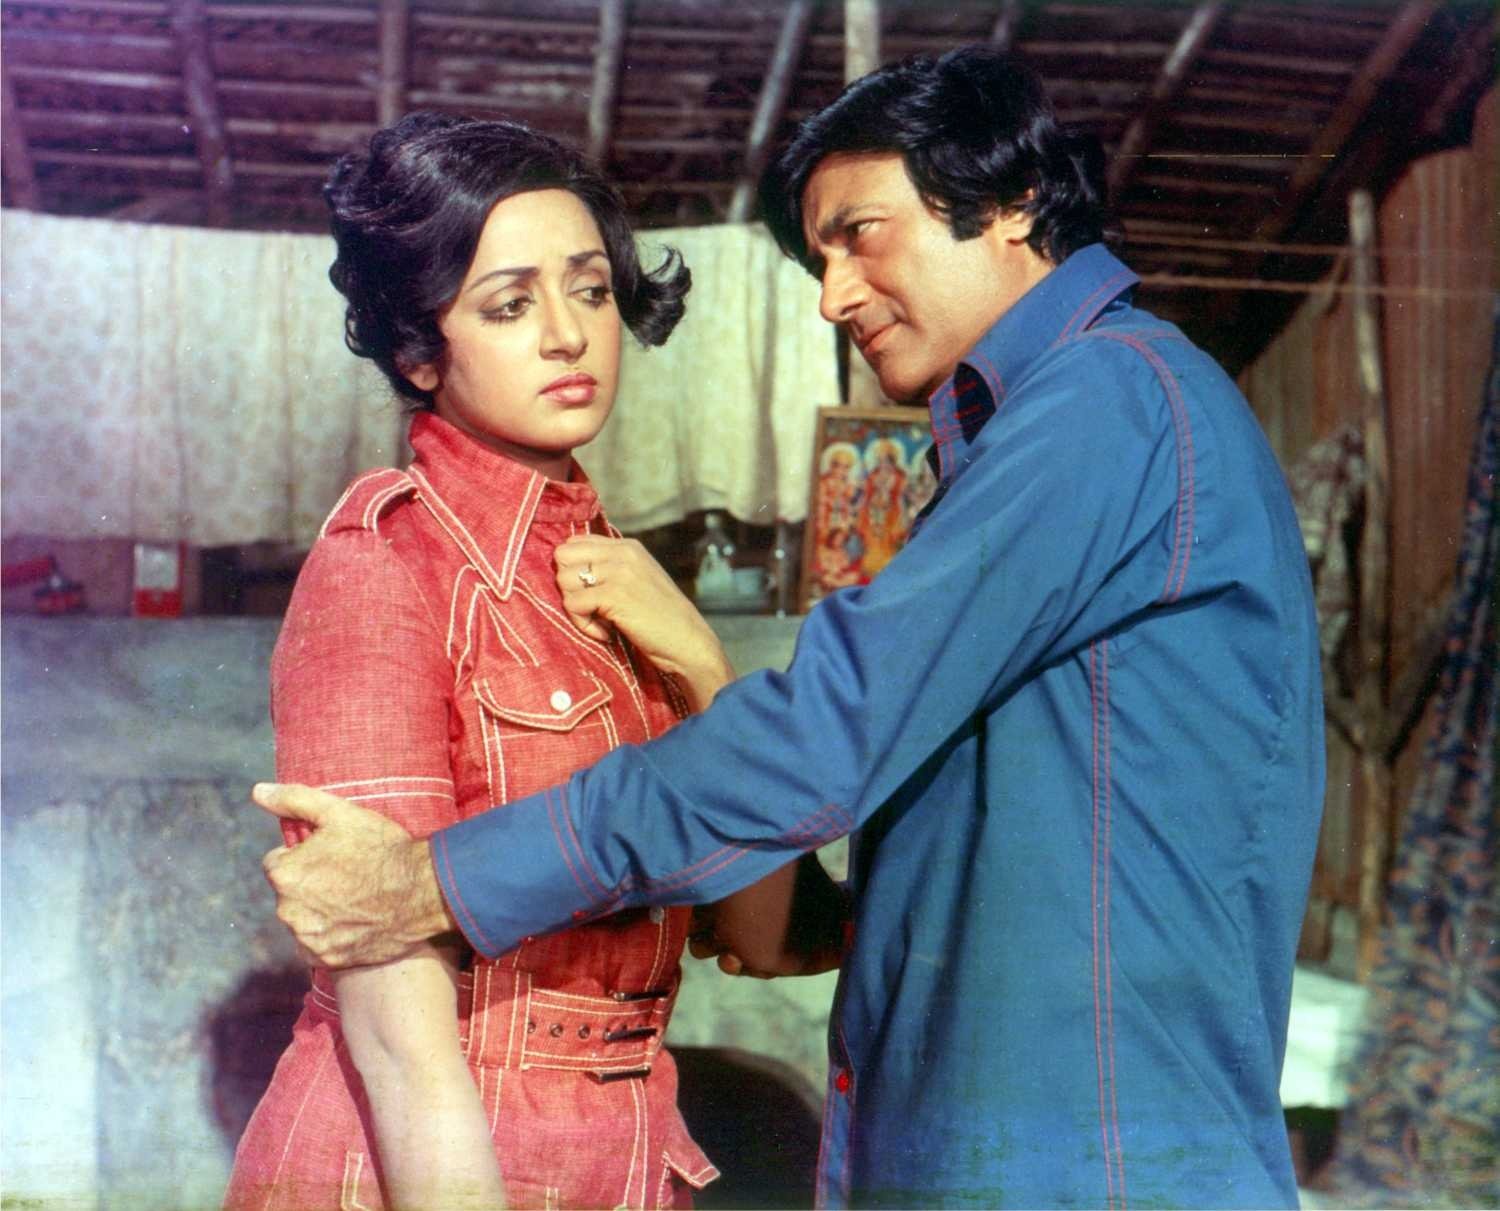 Hema Malini was sweating while doing this scene with Dev Anand! The Dream Girl was in such a state due to shame